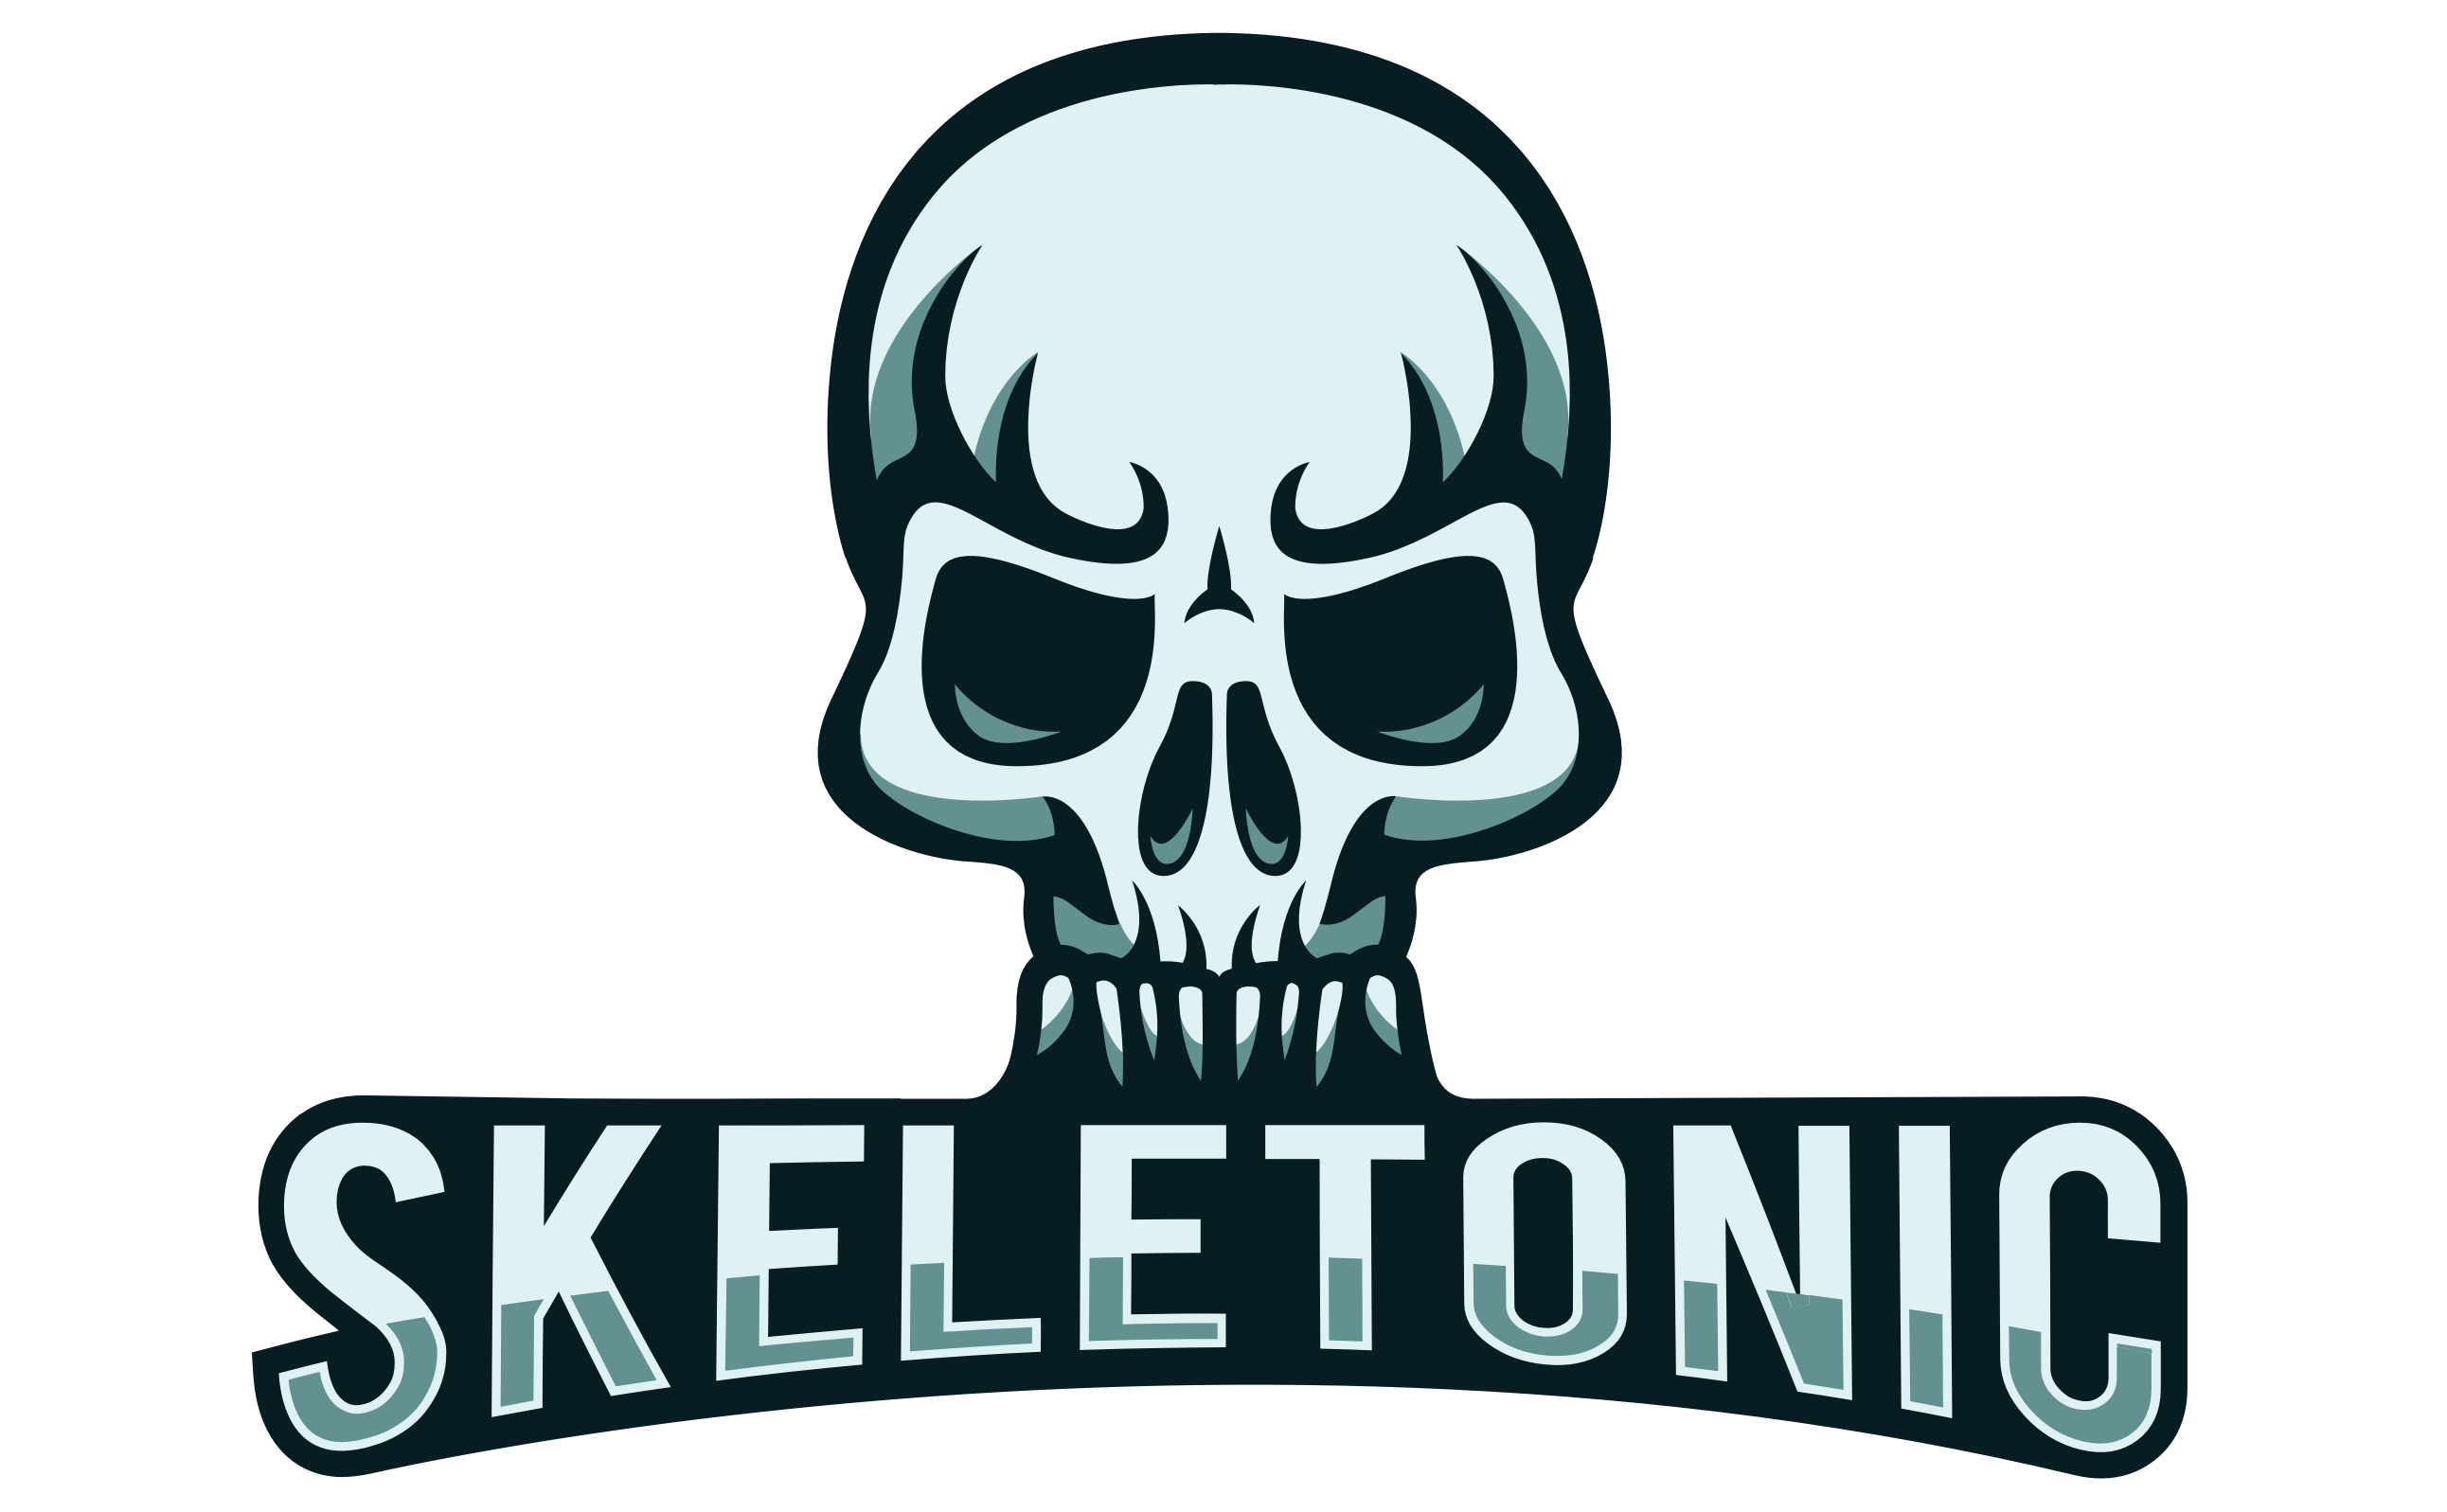 a banner for the Skeletonic Stylus Library